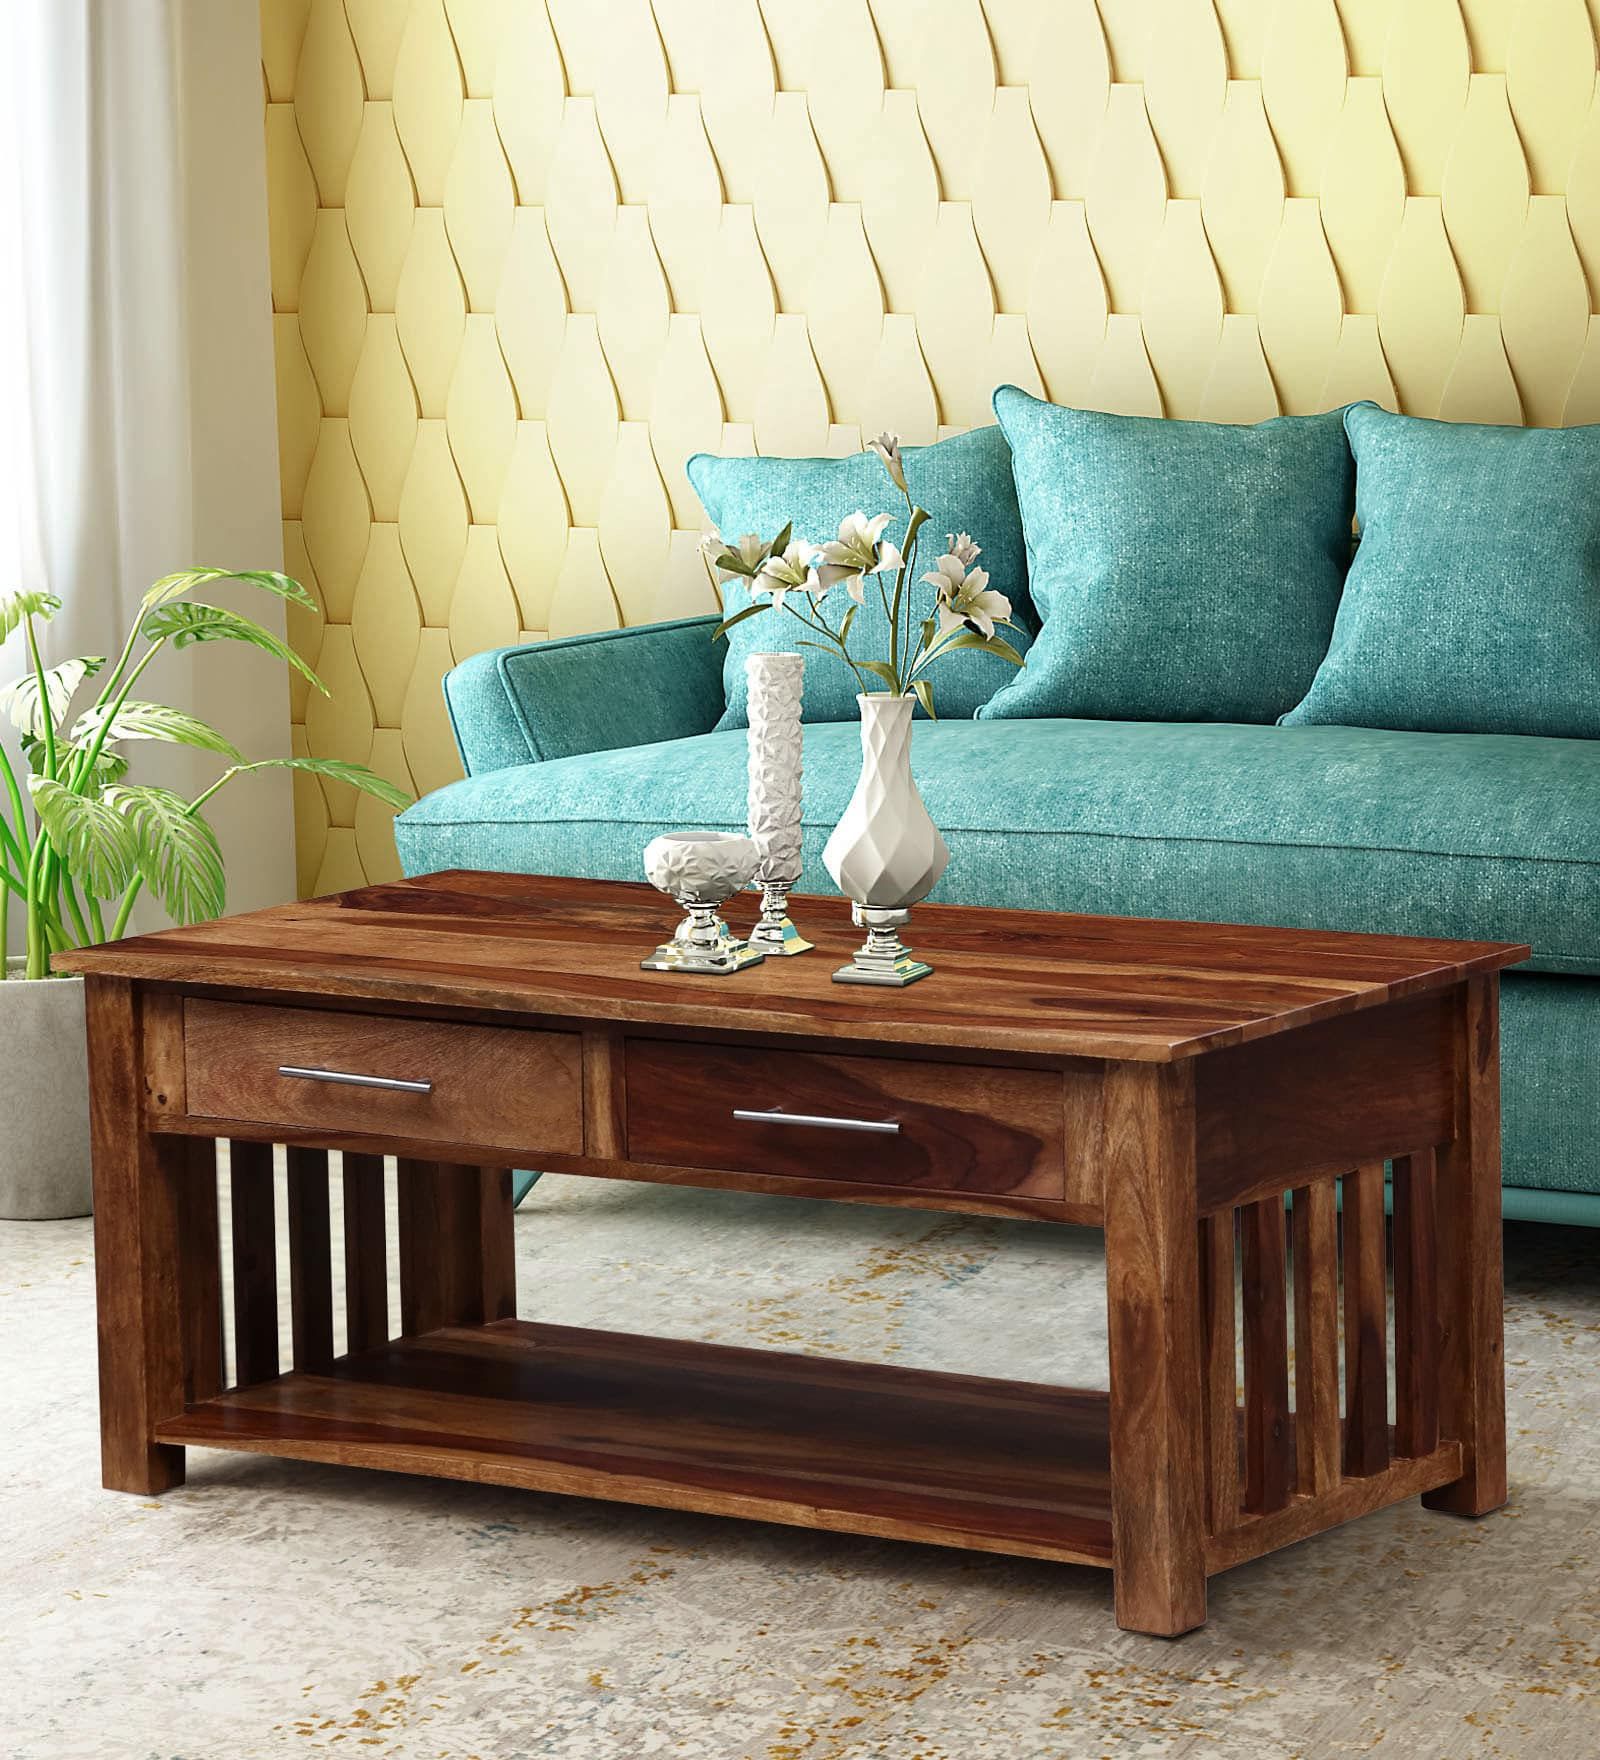 Large Sheesham Solid Wood Coffee Table In Rustic Teak Finishmft For Coffee Tables With Solid Legs (View 9 of 20)